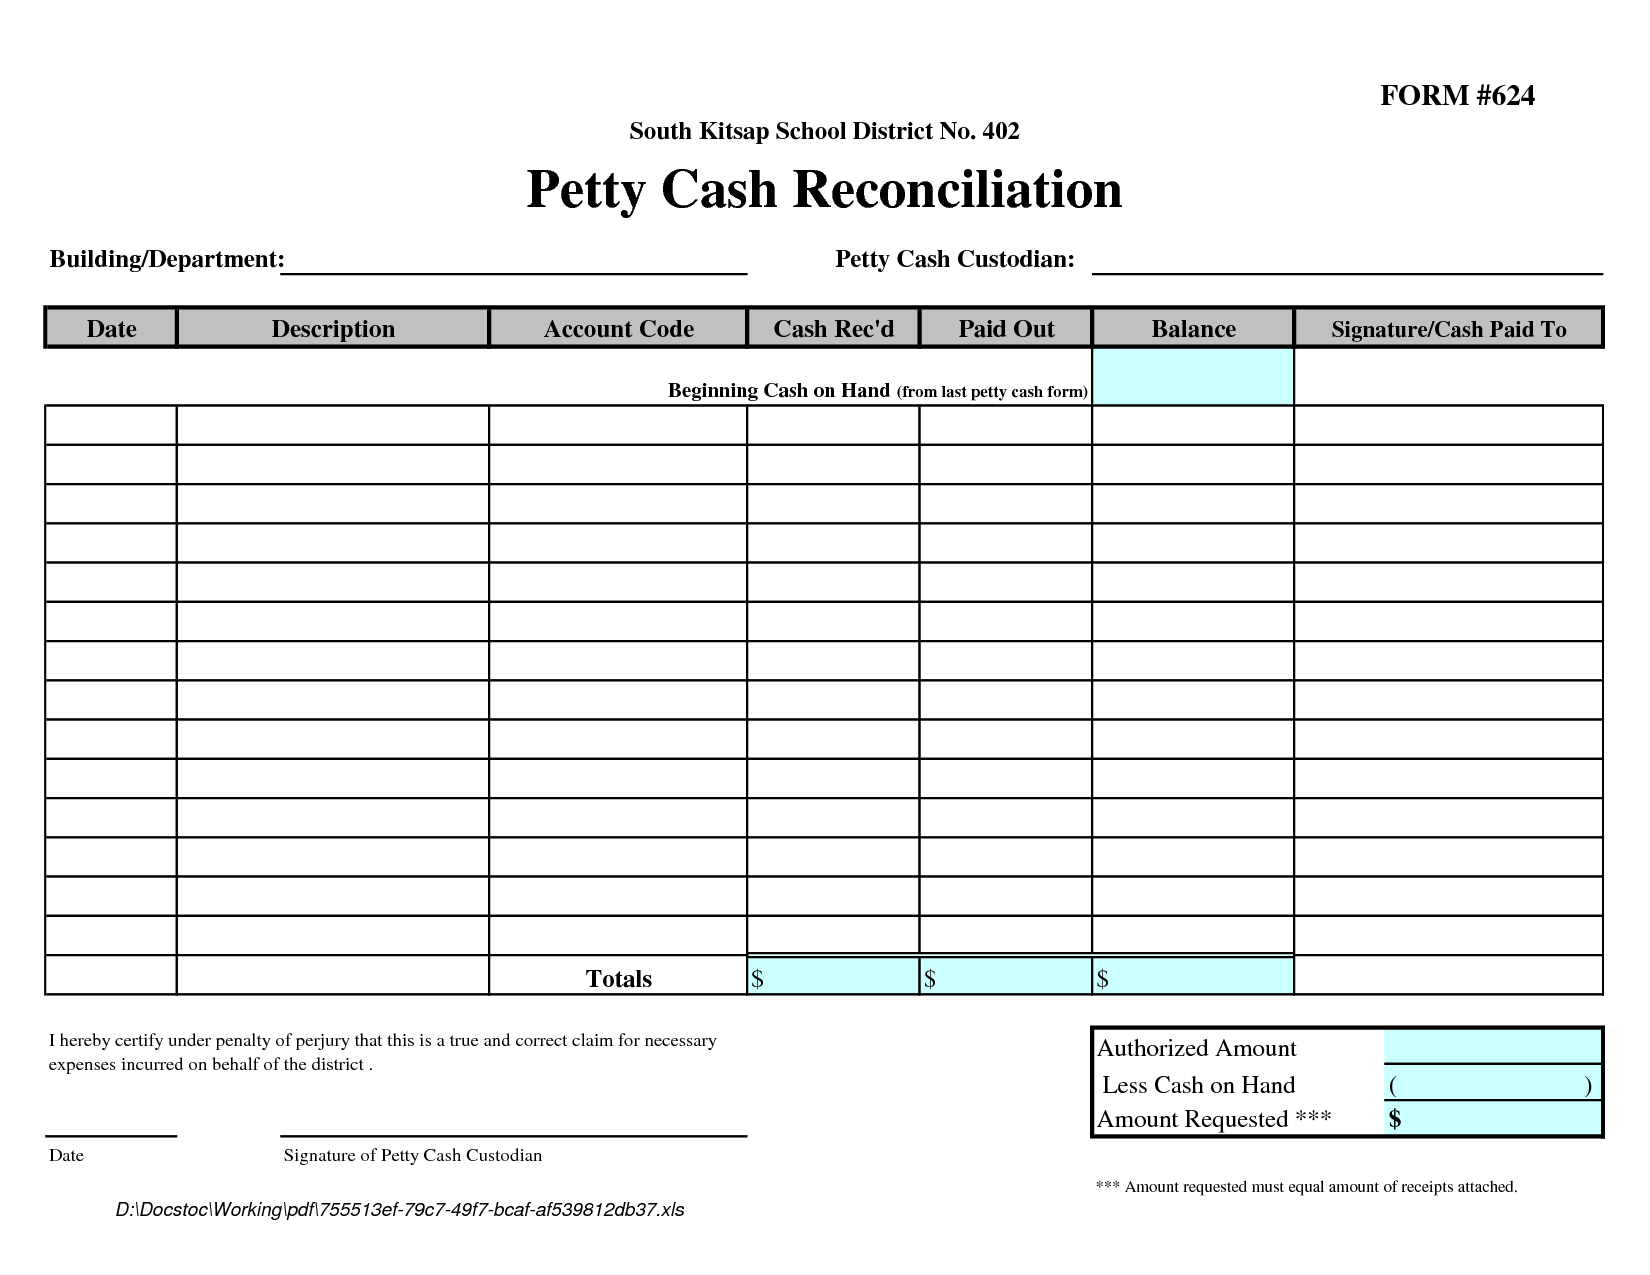 Petty Cash Reconciliation Form   Fill Online, Printable, Fillable 